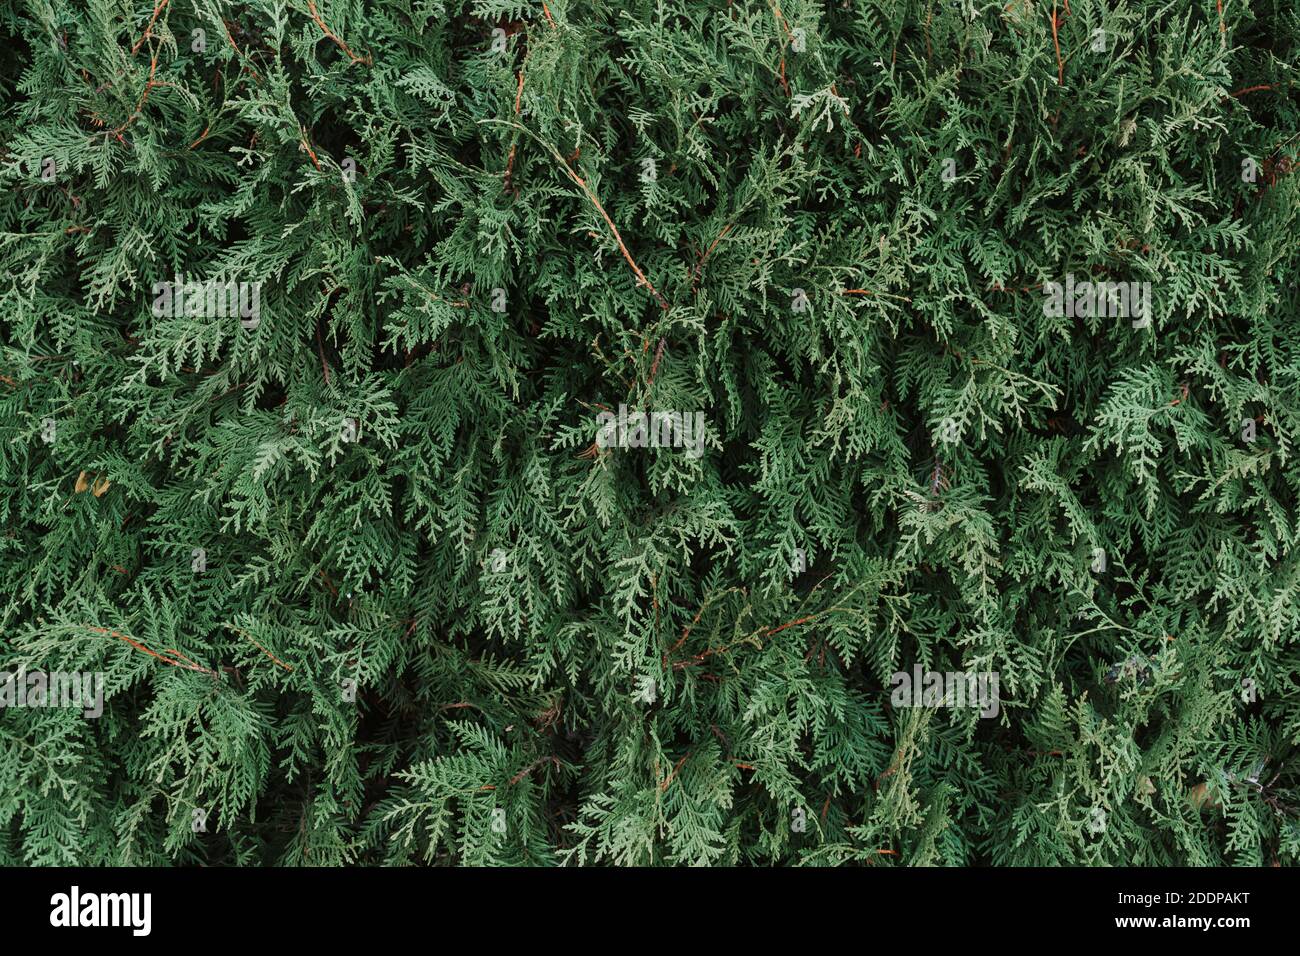 Texture of a green plant close-up, part of a thuja Stock Photo